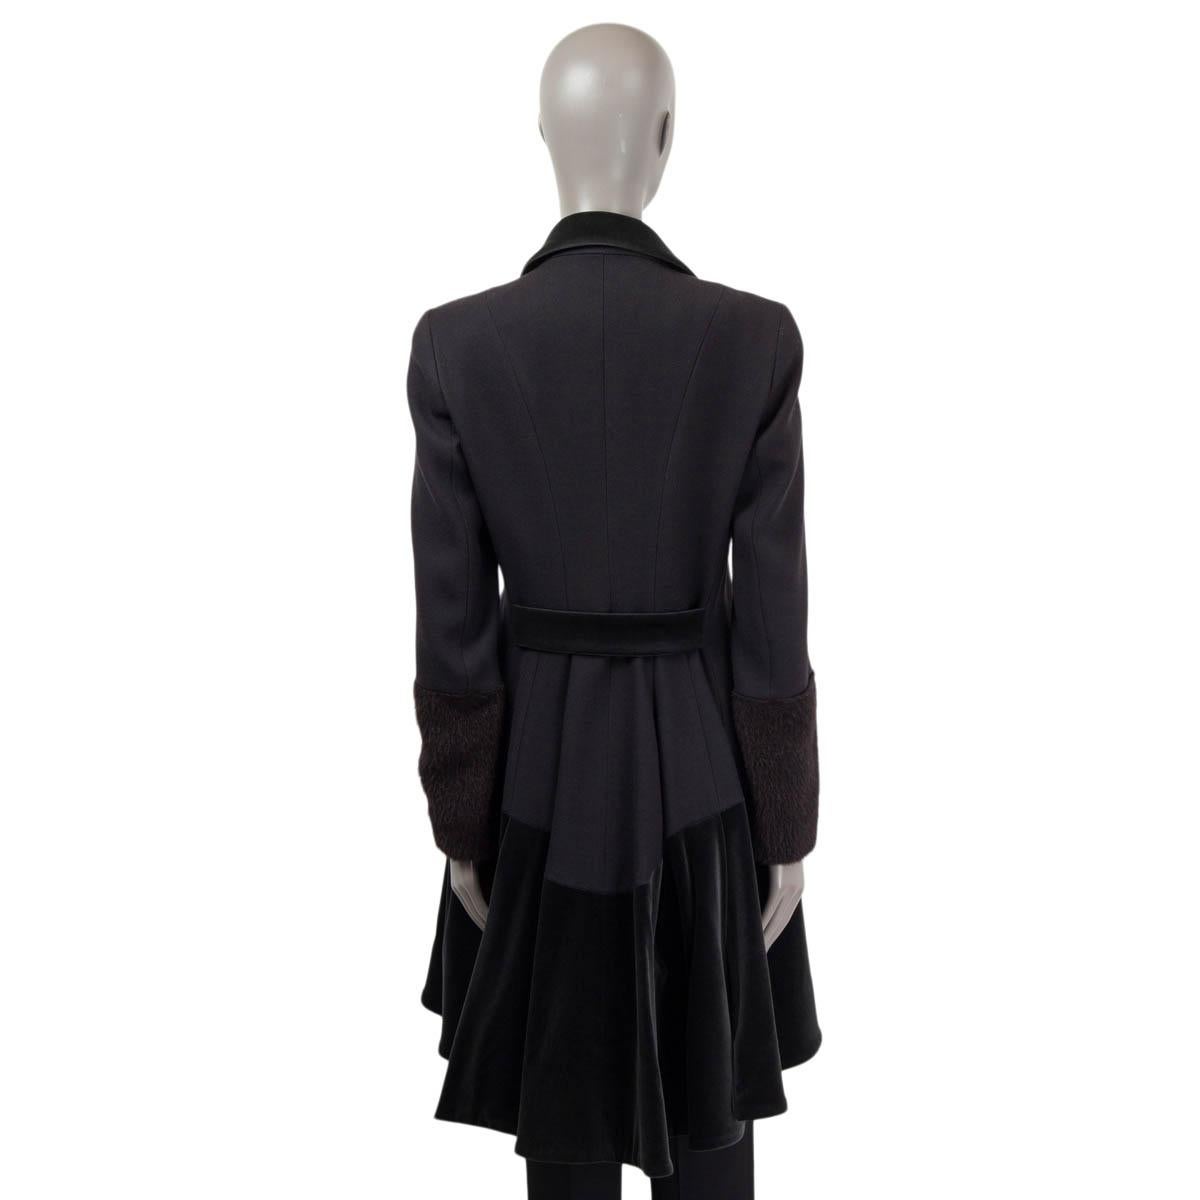 ETRO black wool VELVET PANELED Double Breasted Coat Jacket 44 L In Excellent Condition For Sale In Zürich, CH